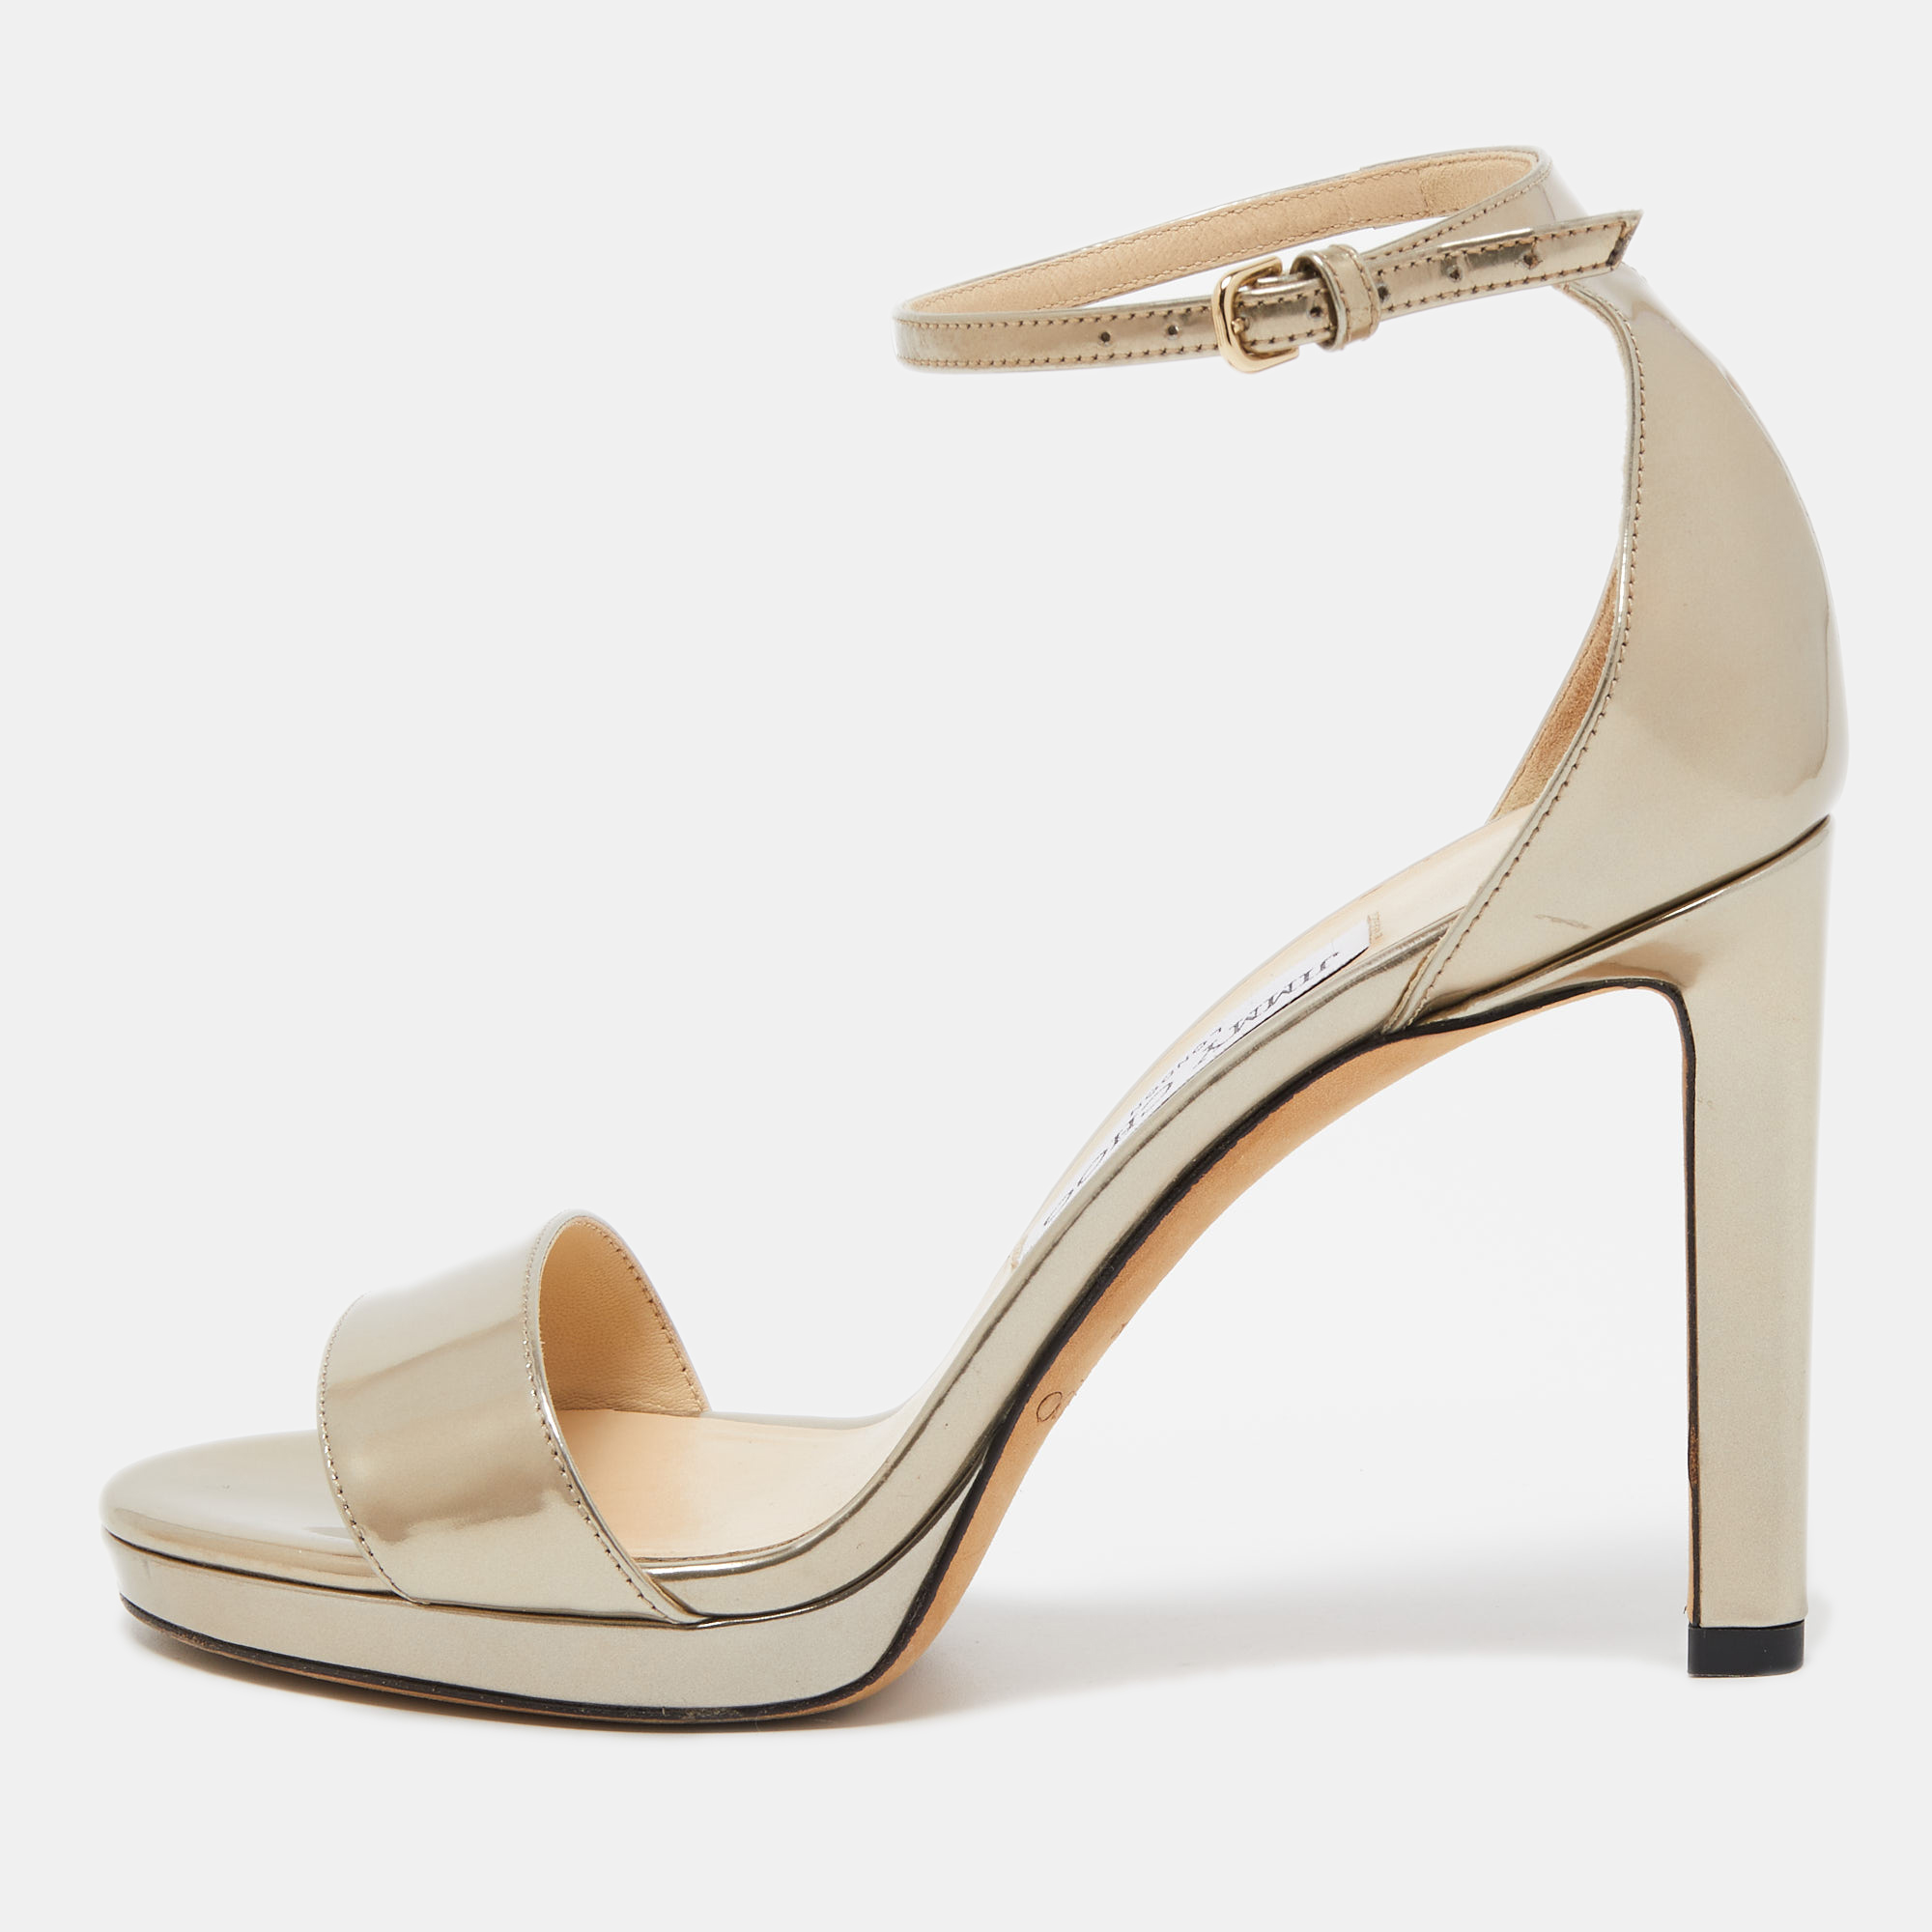 Pre-owned Jimmy Choo Gold Leather Misty Ankle Strap Sandals Size 37